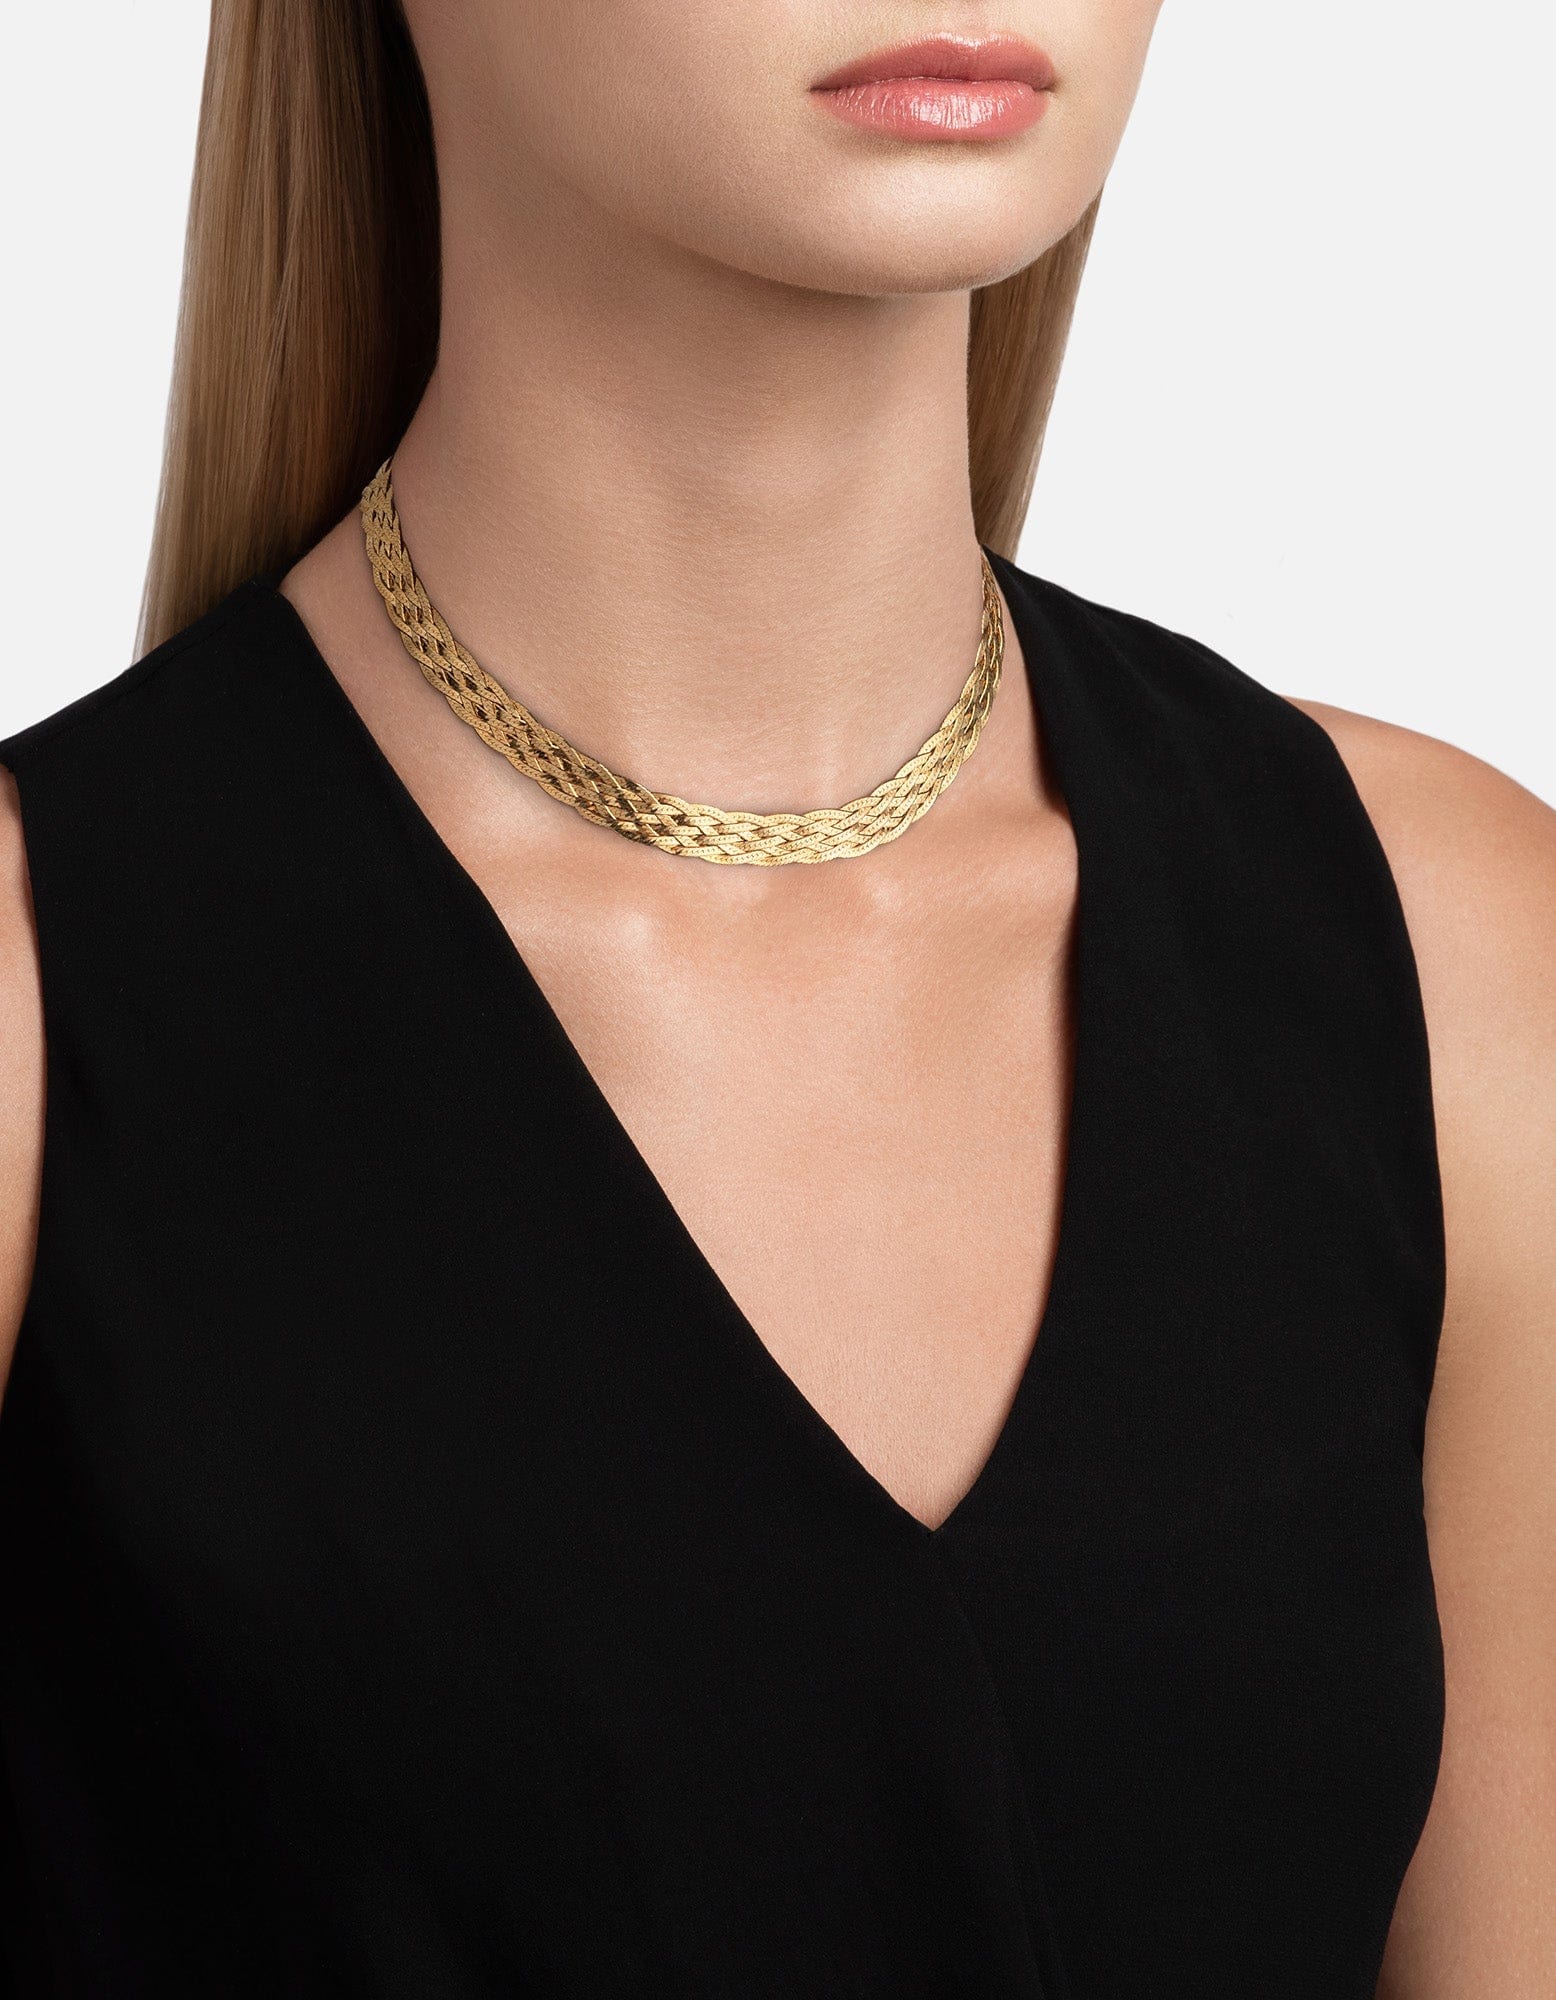 Buy Tricolor Gold Braided Herringbone Chain Necklace / 925 Sterling Silver  / 14k Yellow & Rose Gold Plated / Twisted Flat Snake /16 18 20 Inches  Online in India - Etsy